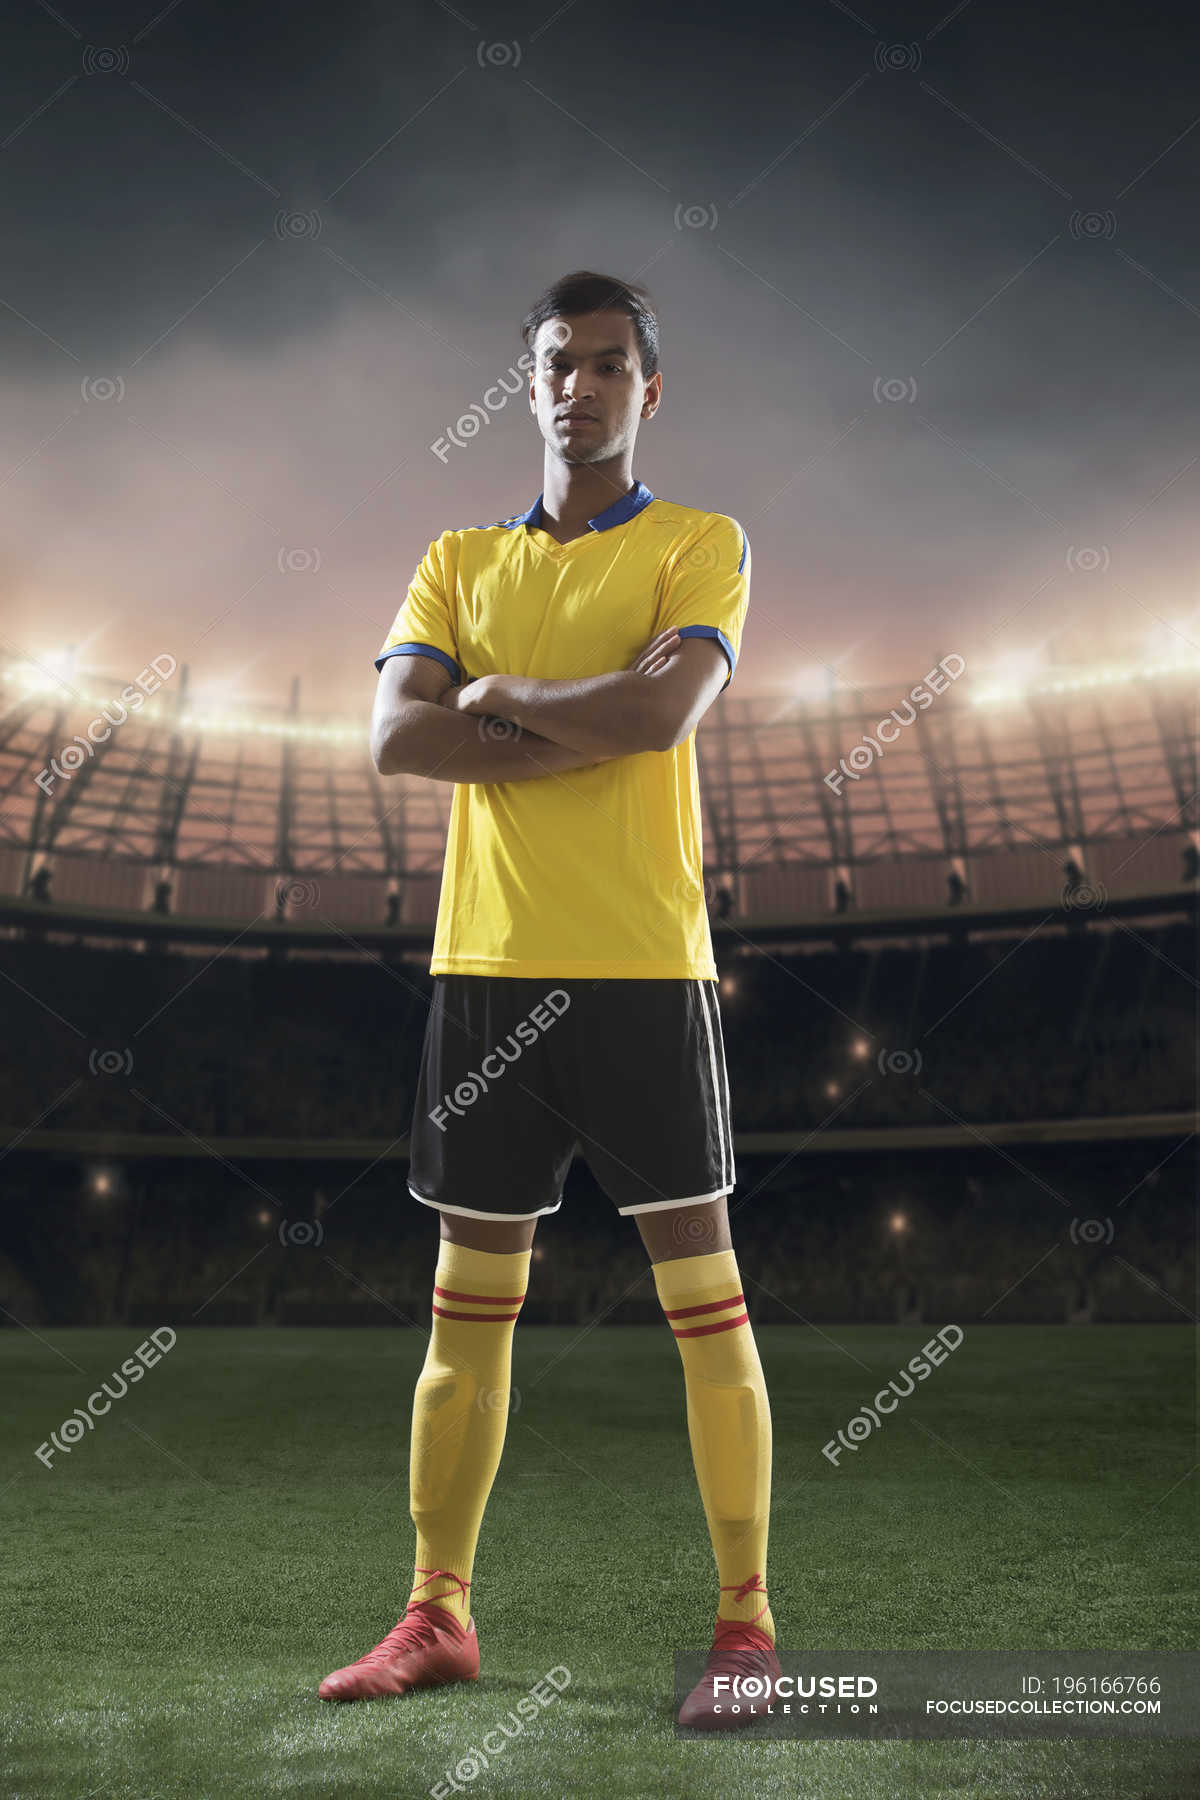 Football player standing portrait with stadium at background — sportsman,  vertical - Stock Photo | #196166766